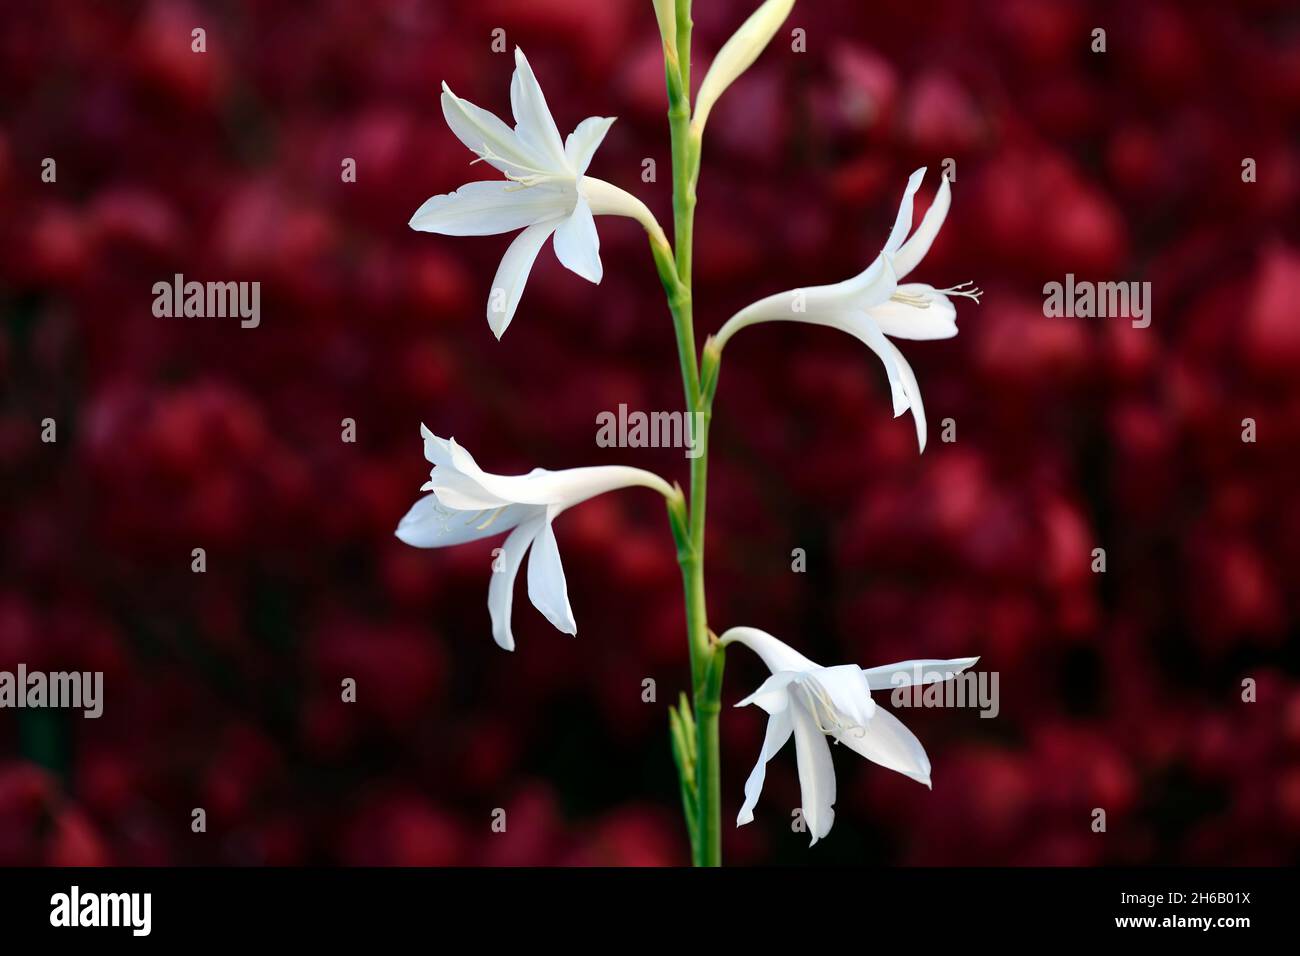 Watsonia borbonica ardernei,Watsonia borbonica subsp ardernei,white flowers red background,white flower with red background,flower,flowering,bloom,Cap Stock Photo